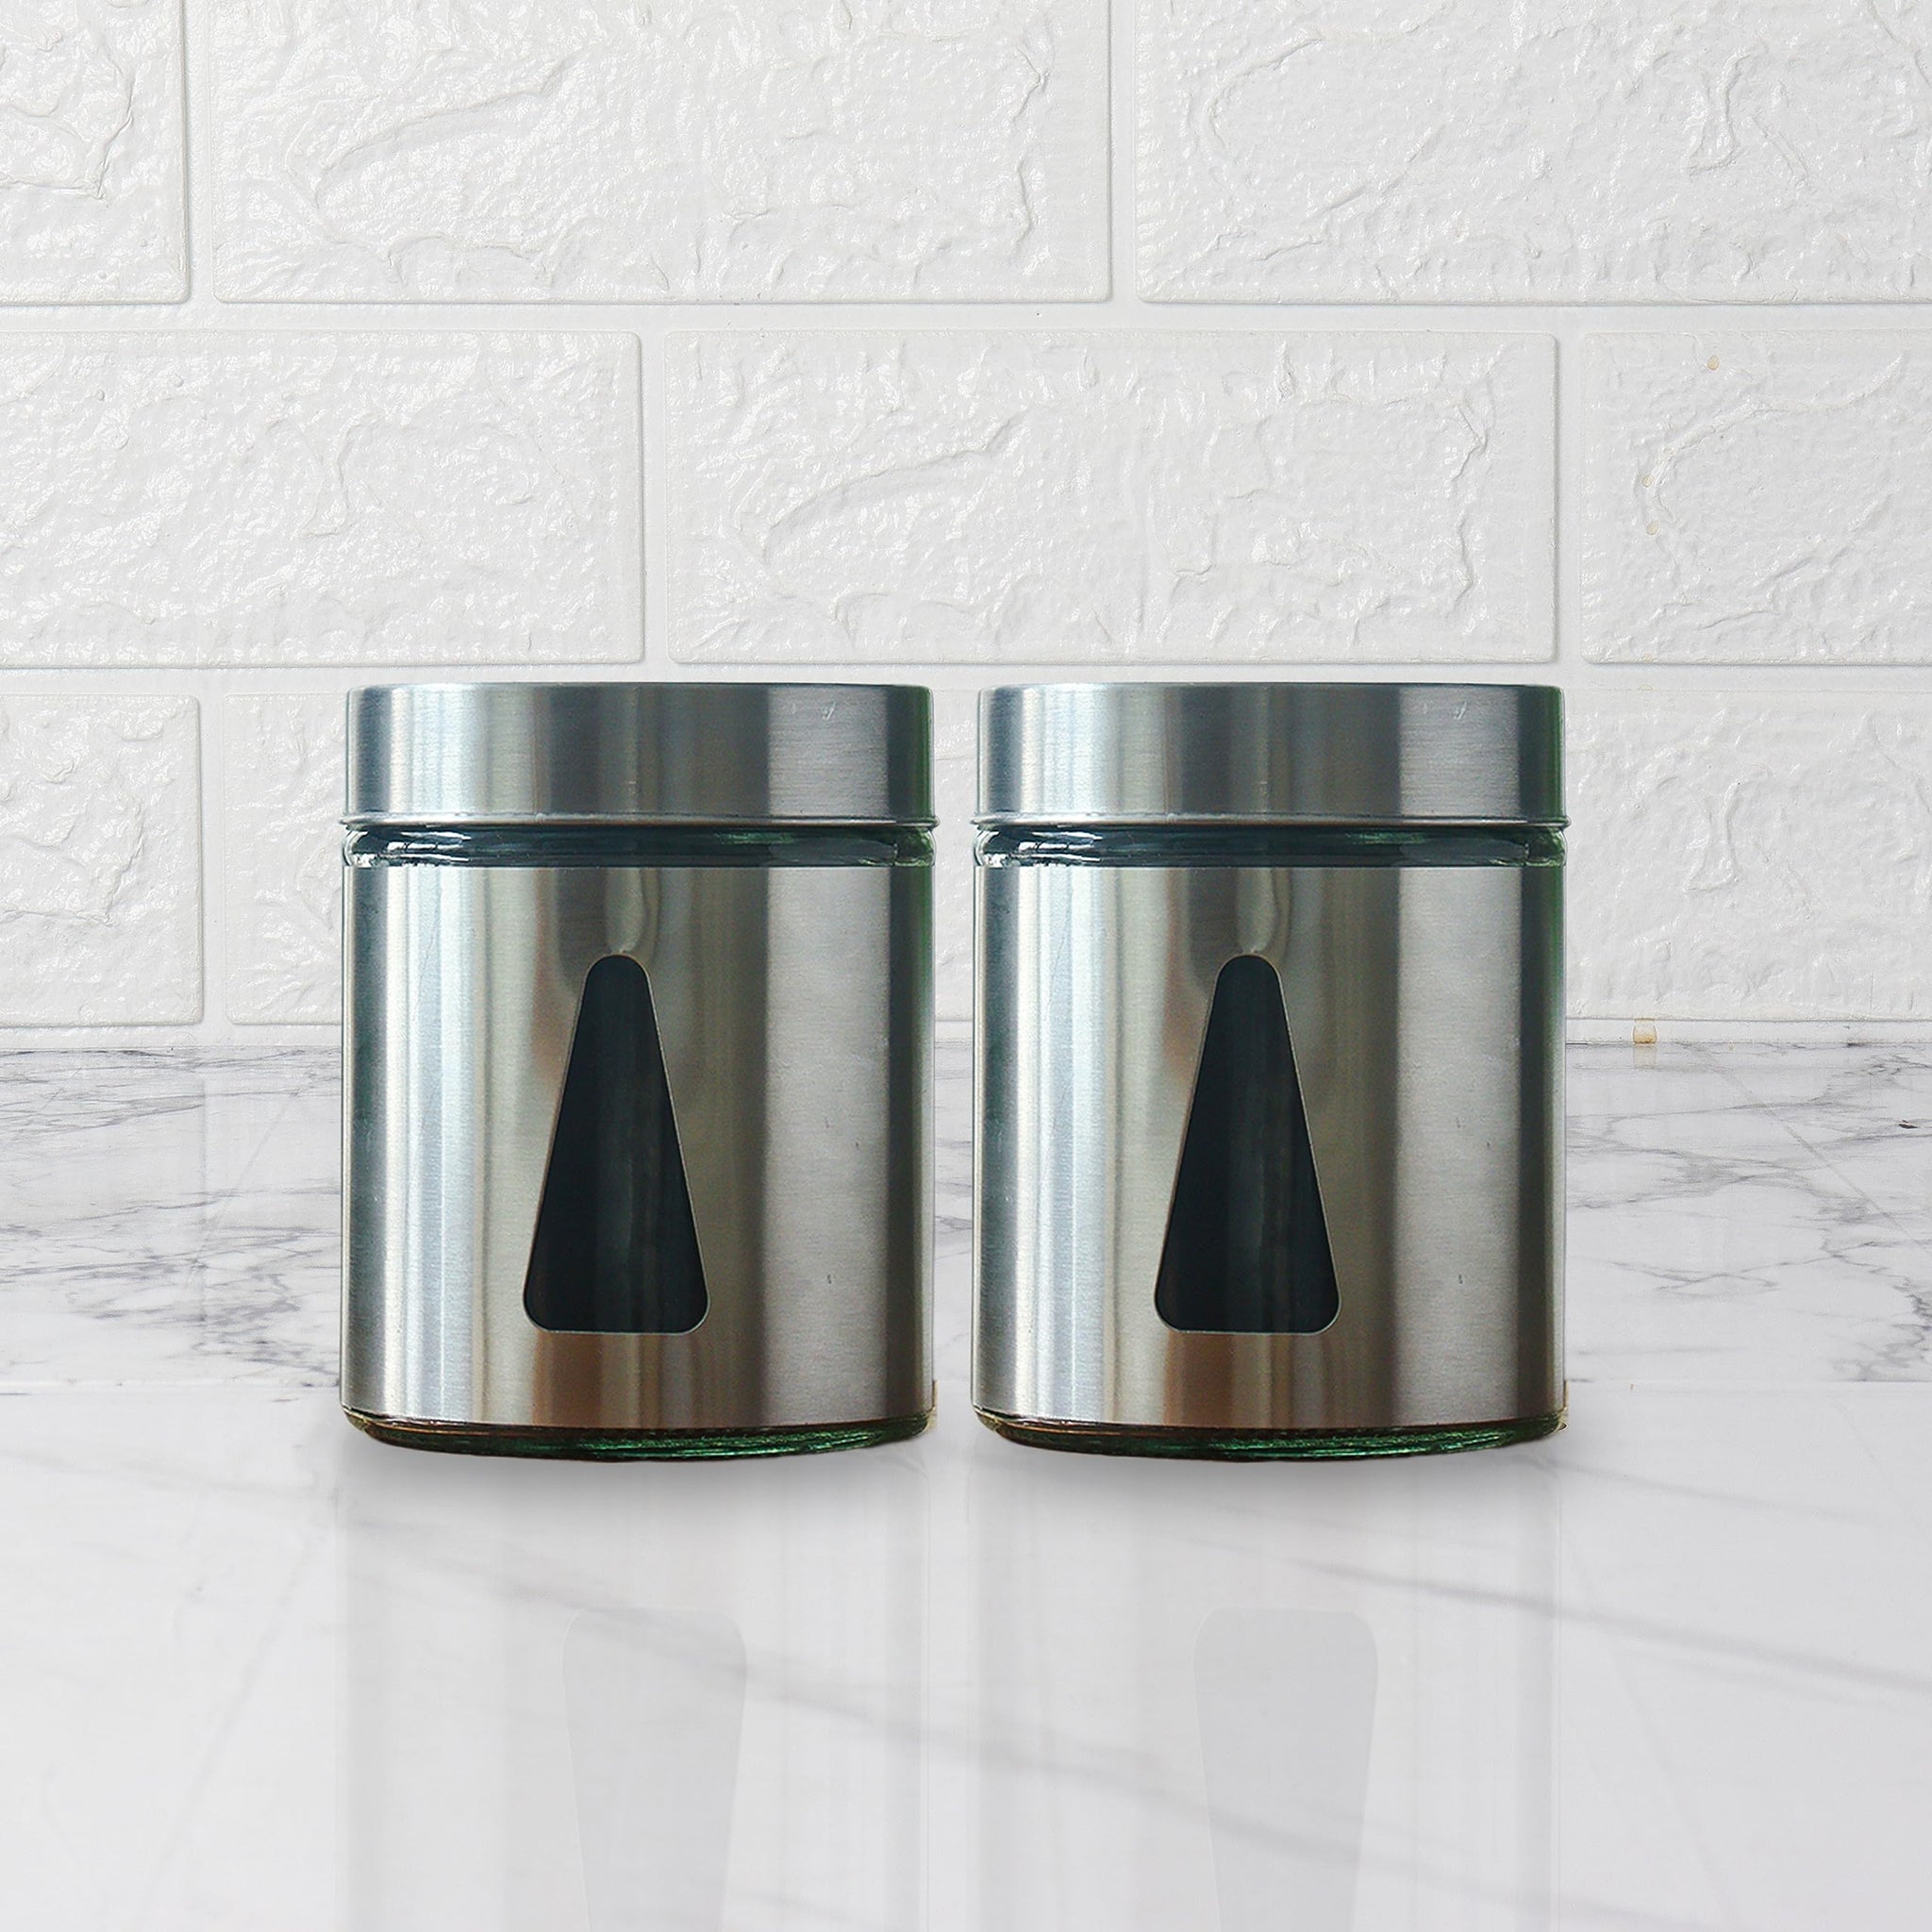 Femora Steel Jar for Kitchen Storage with Triangle Glass Window and Stainless Steel Cover, 1000 ml, Set Of 2, Free Replacement of Lids